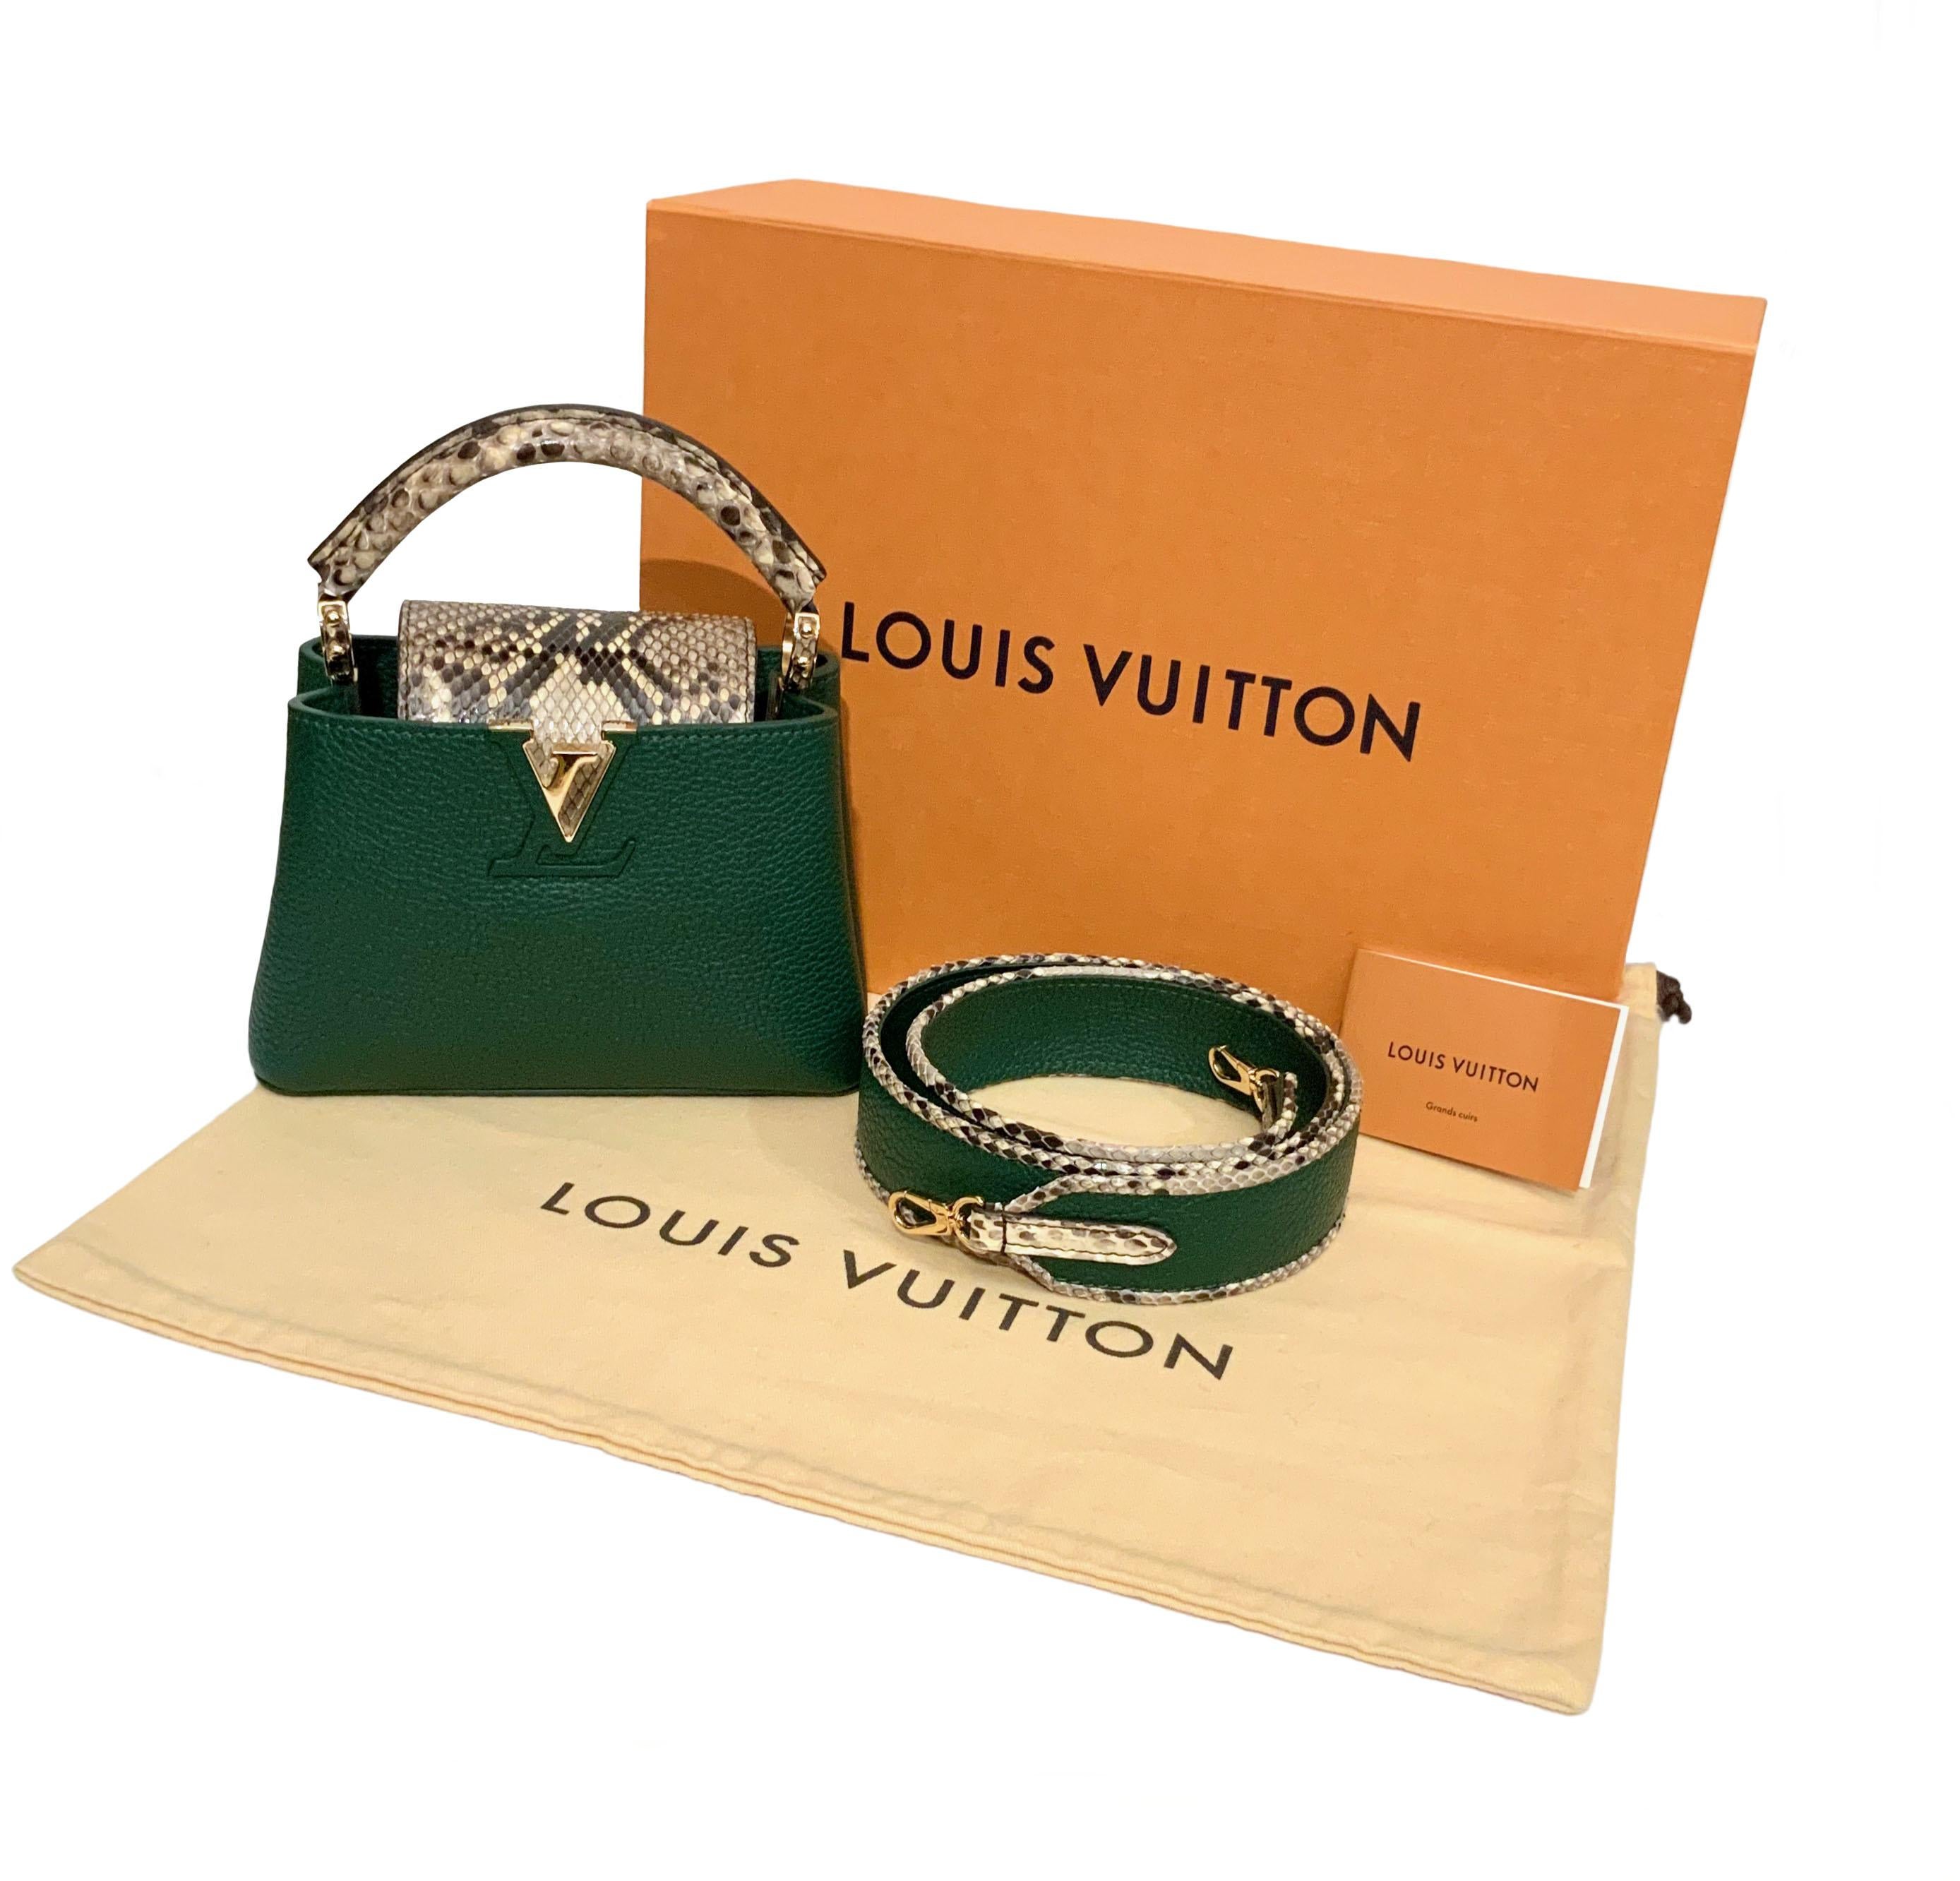 This pre-owned but New Capucines Mini handbag from Louis Vuitton is crafted in grainy Taurillon leather, dyed in a beautiful emerald green and trimmed in shiny precious python skin. 
It can be carried in two different styles: flap inside or outside